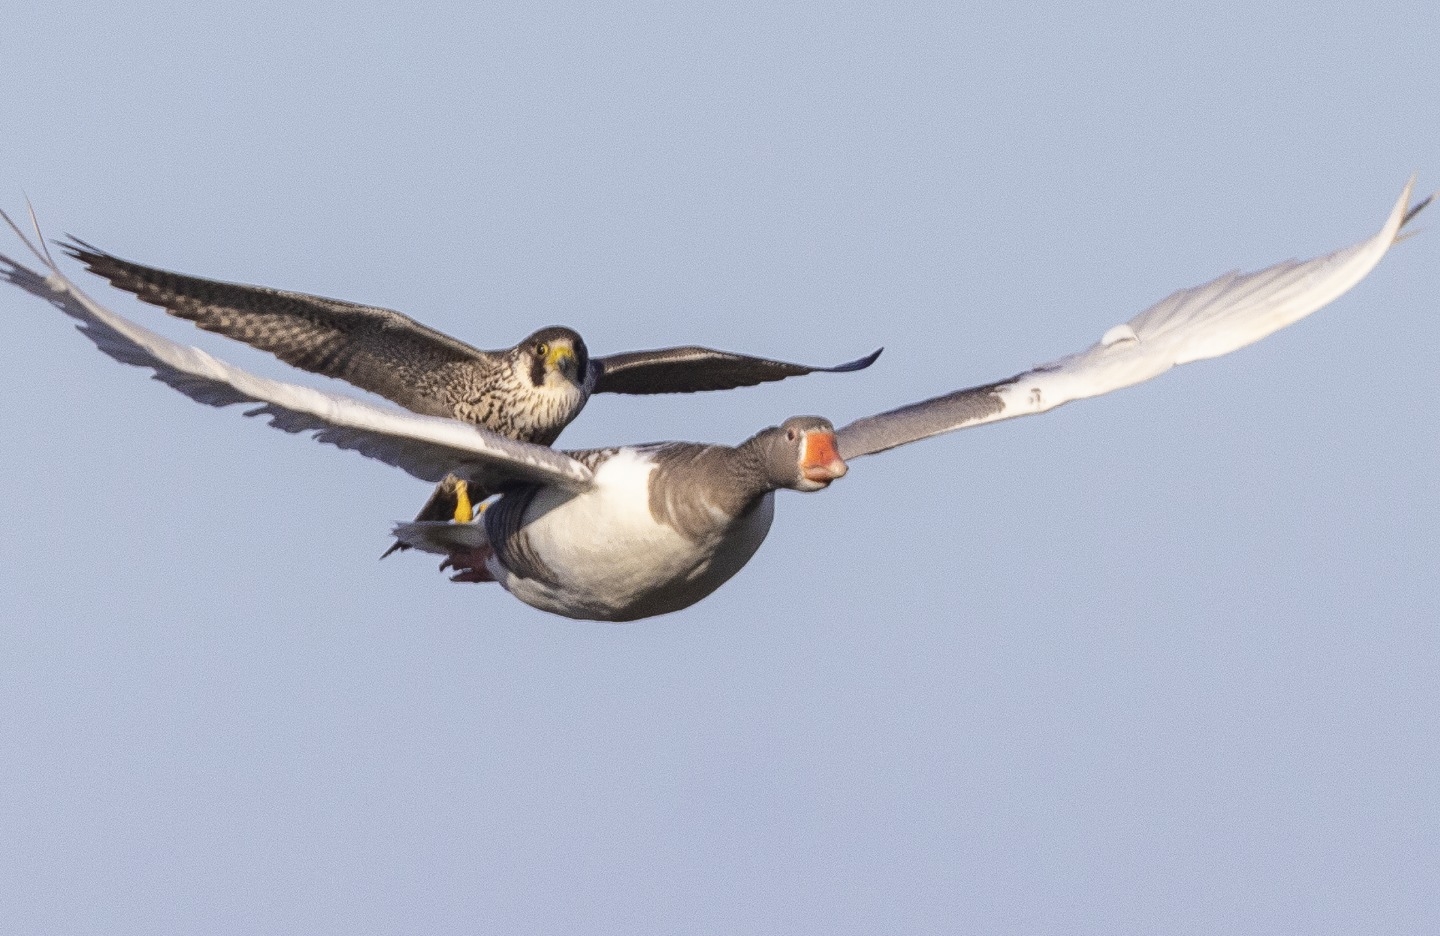 Goose hitches lift on peregrine falcon by John Ovenden.